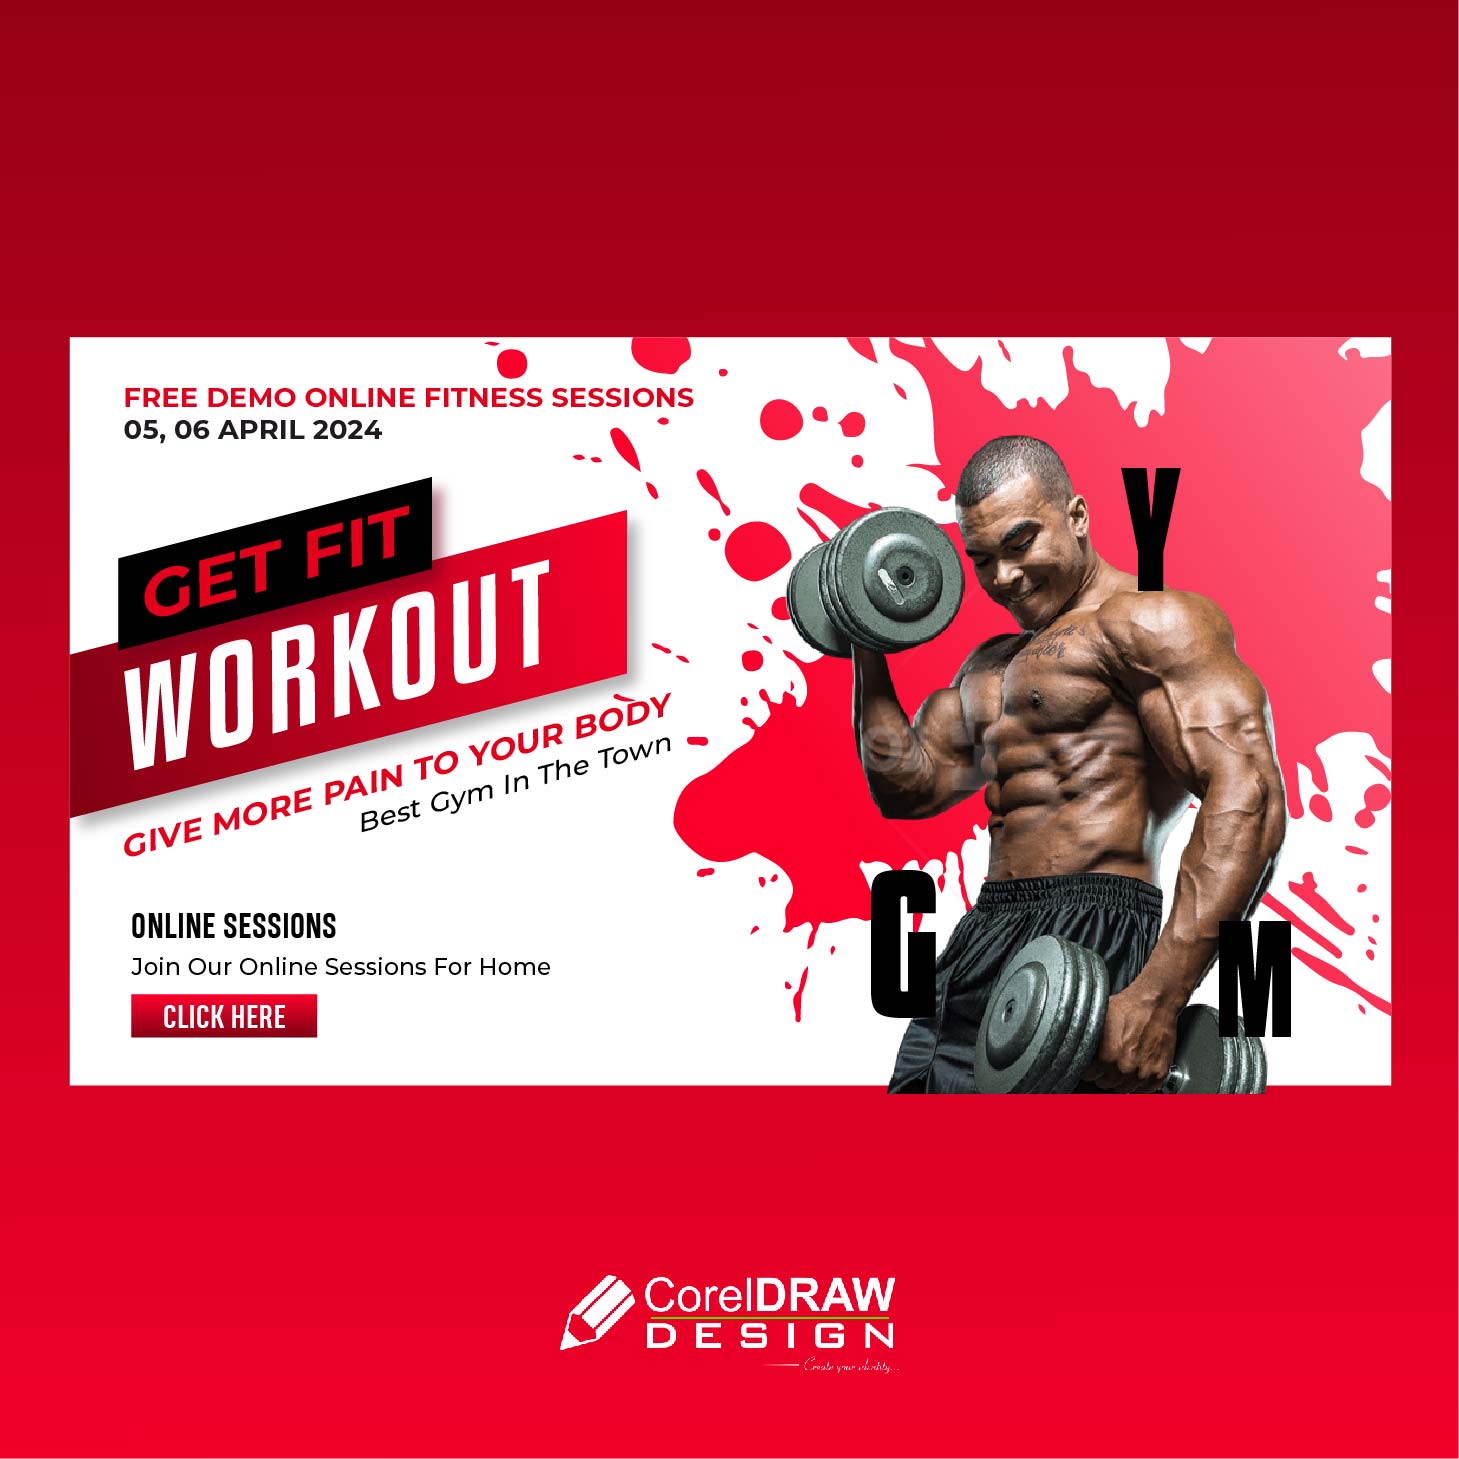 Professional online fitness sessions color splash red banner vector free